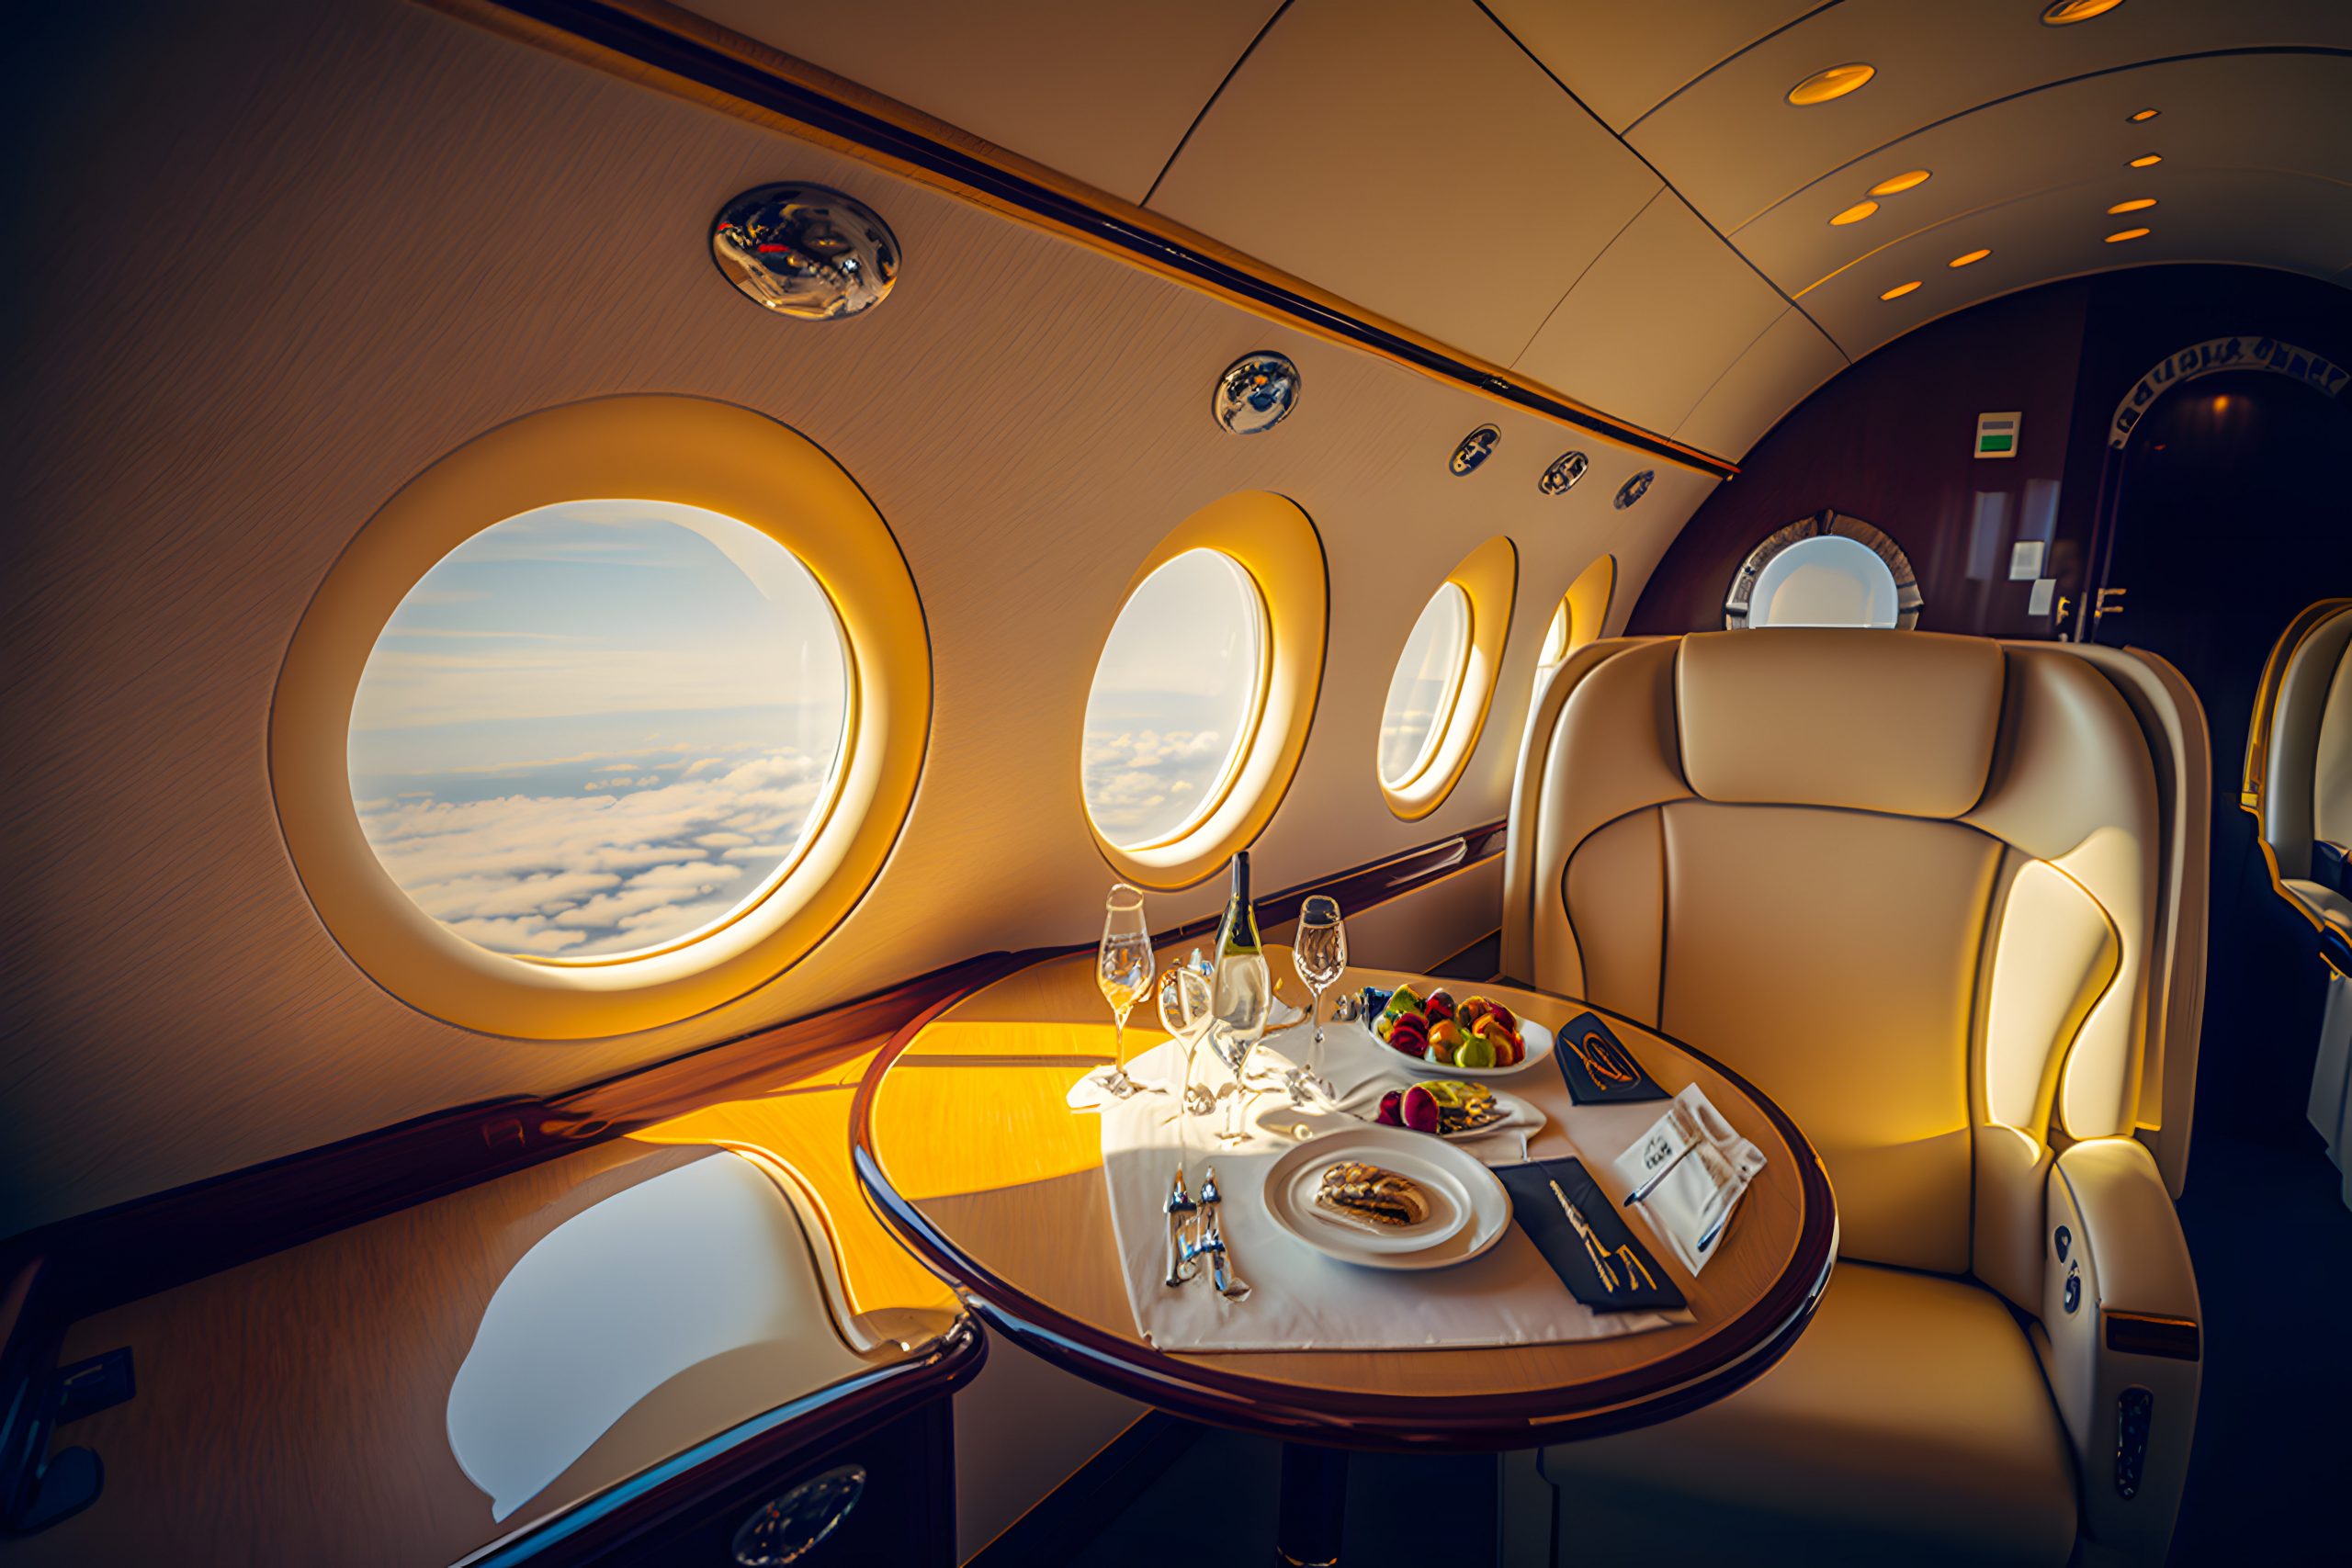 Eating on board a business jet